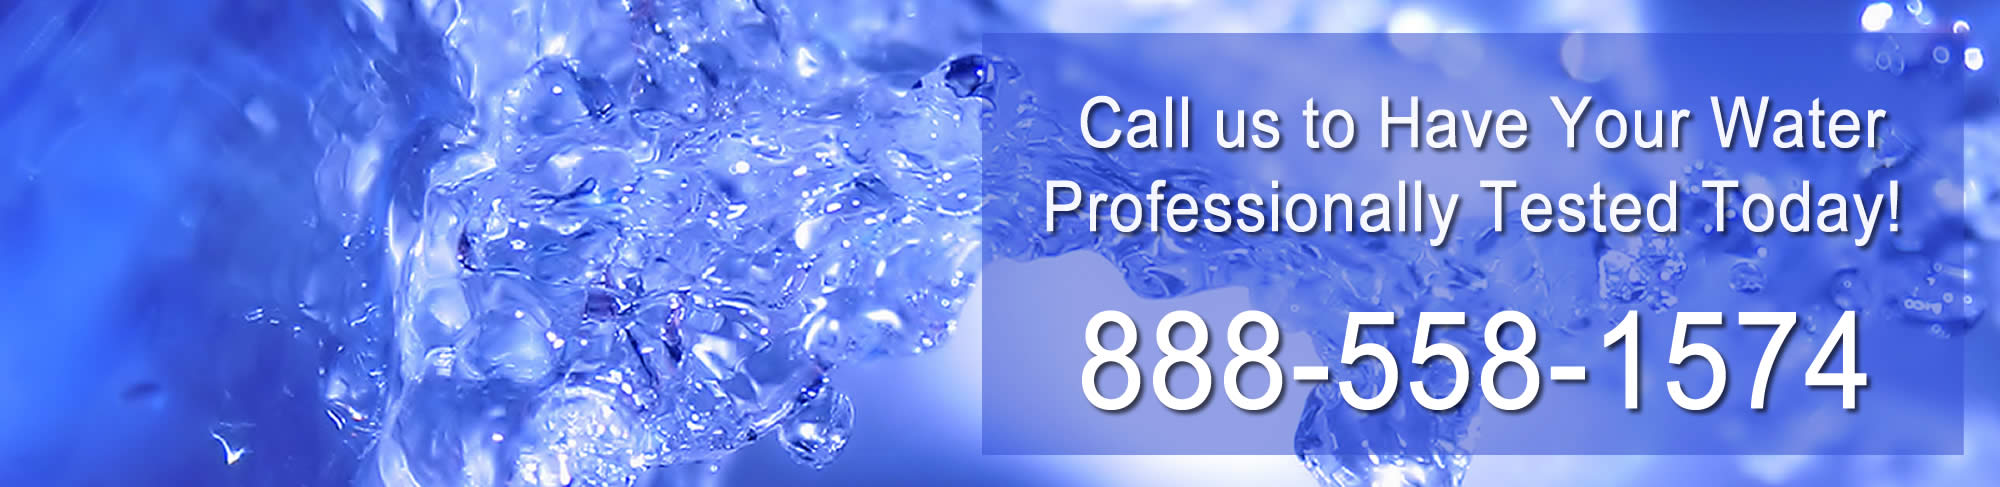 Specializing in Ledyard CT Water Testing and Analysis